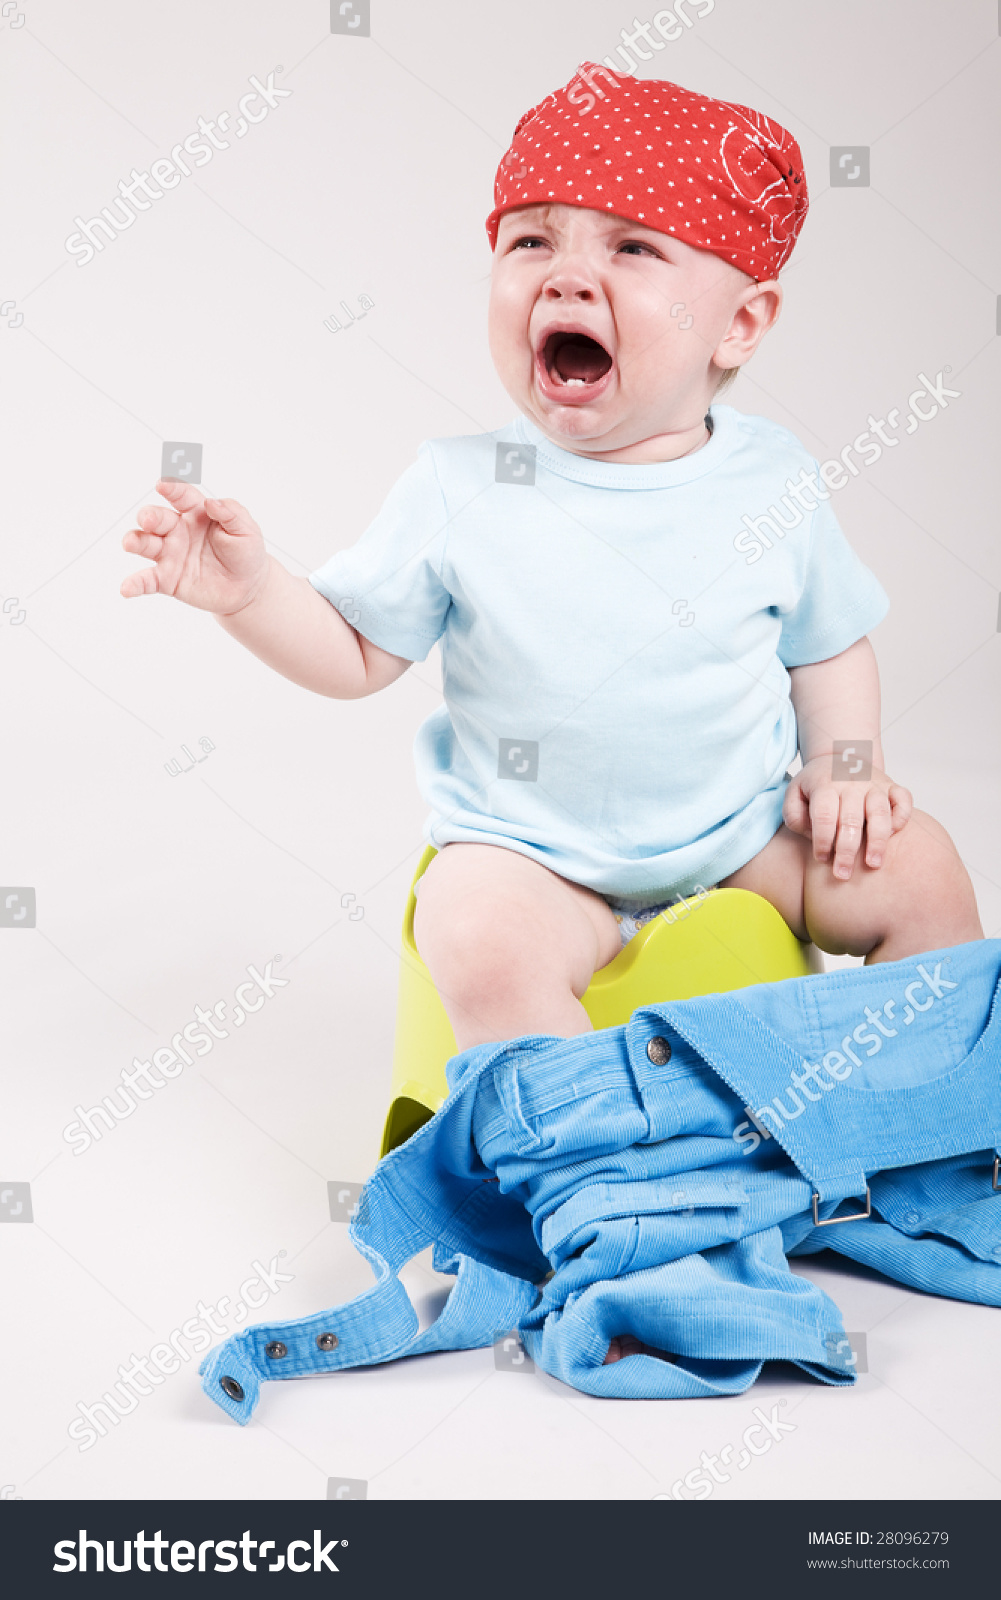 baby crying in the toilet Child crying on potty stock photo 28096279 : shutterstock